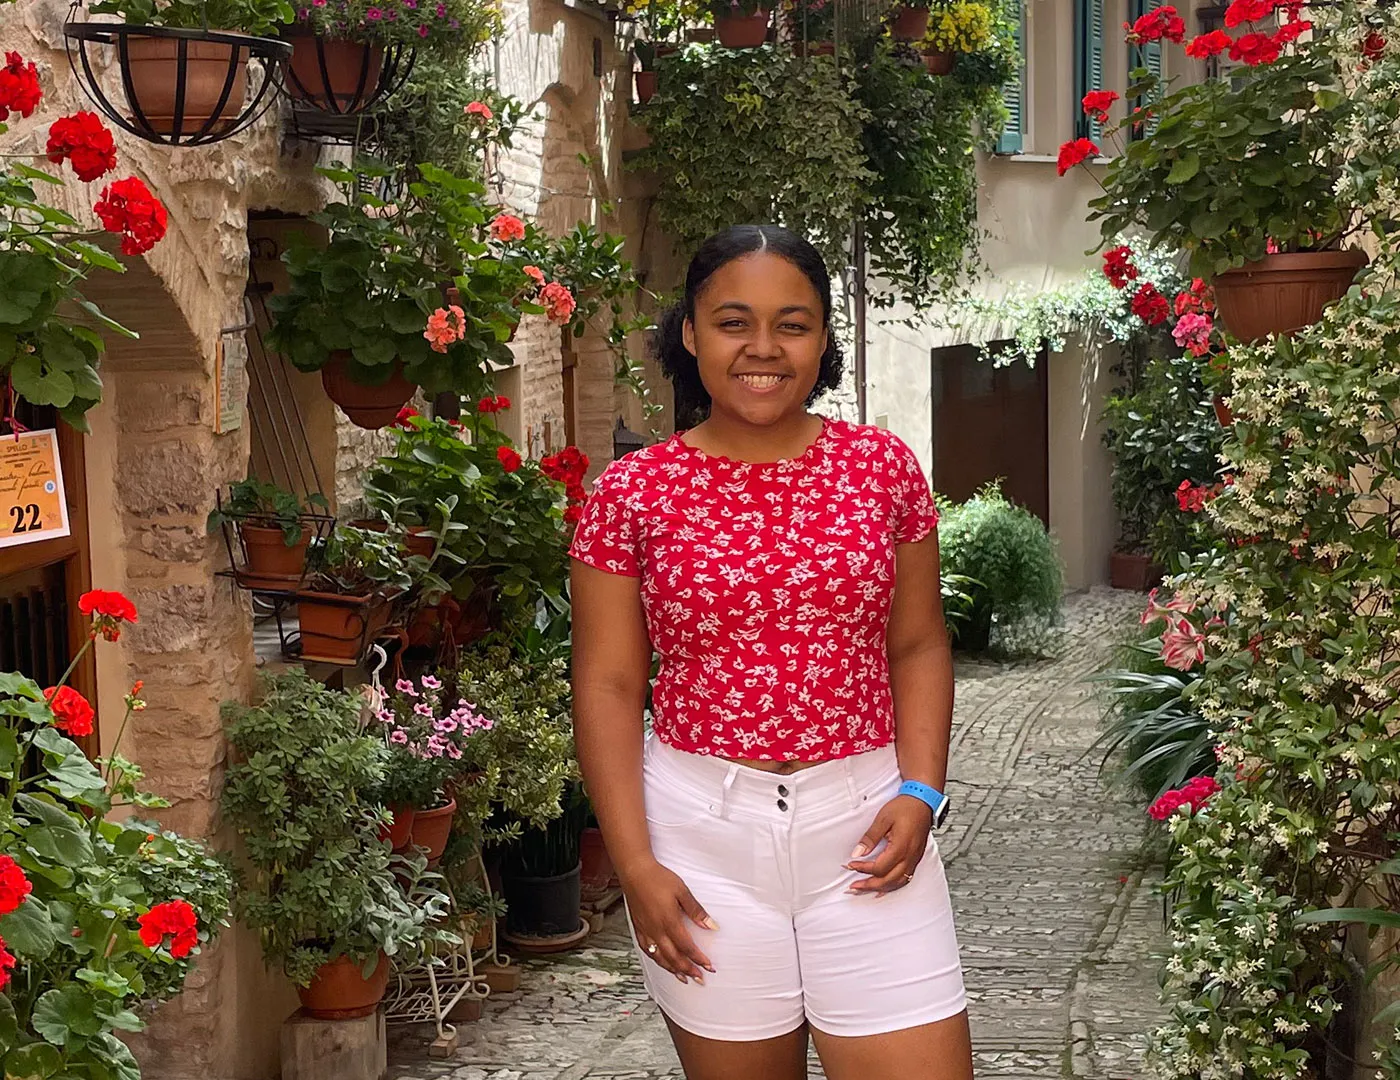 Ellie Flores on a street in Italy while studying abroad